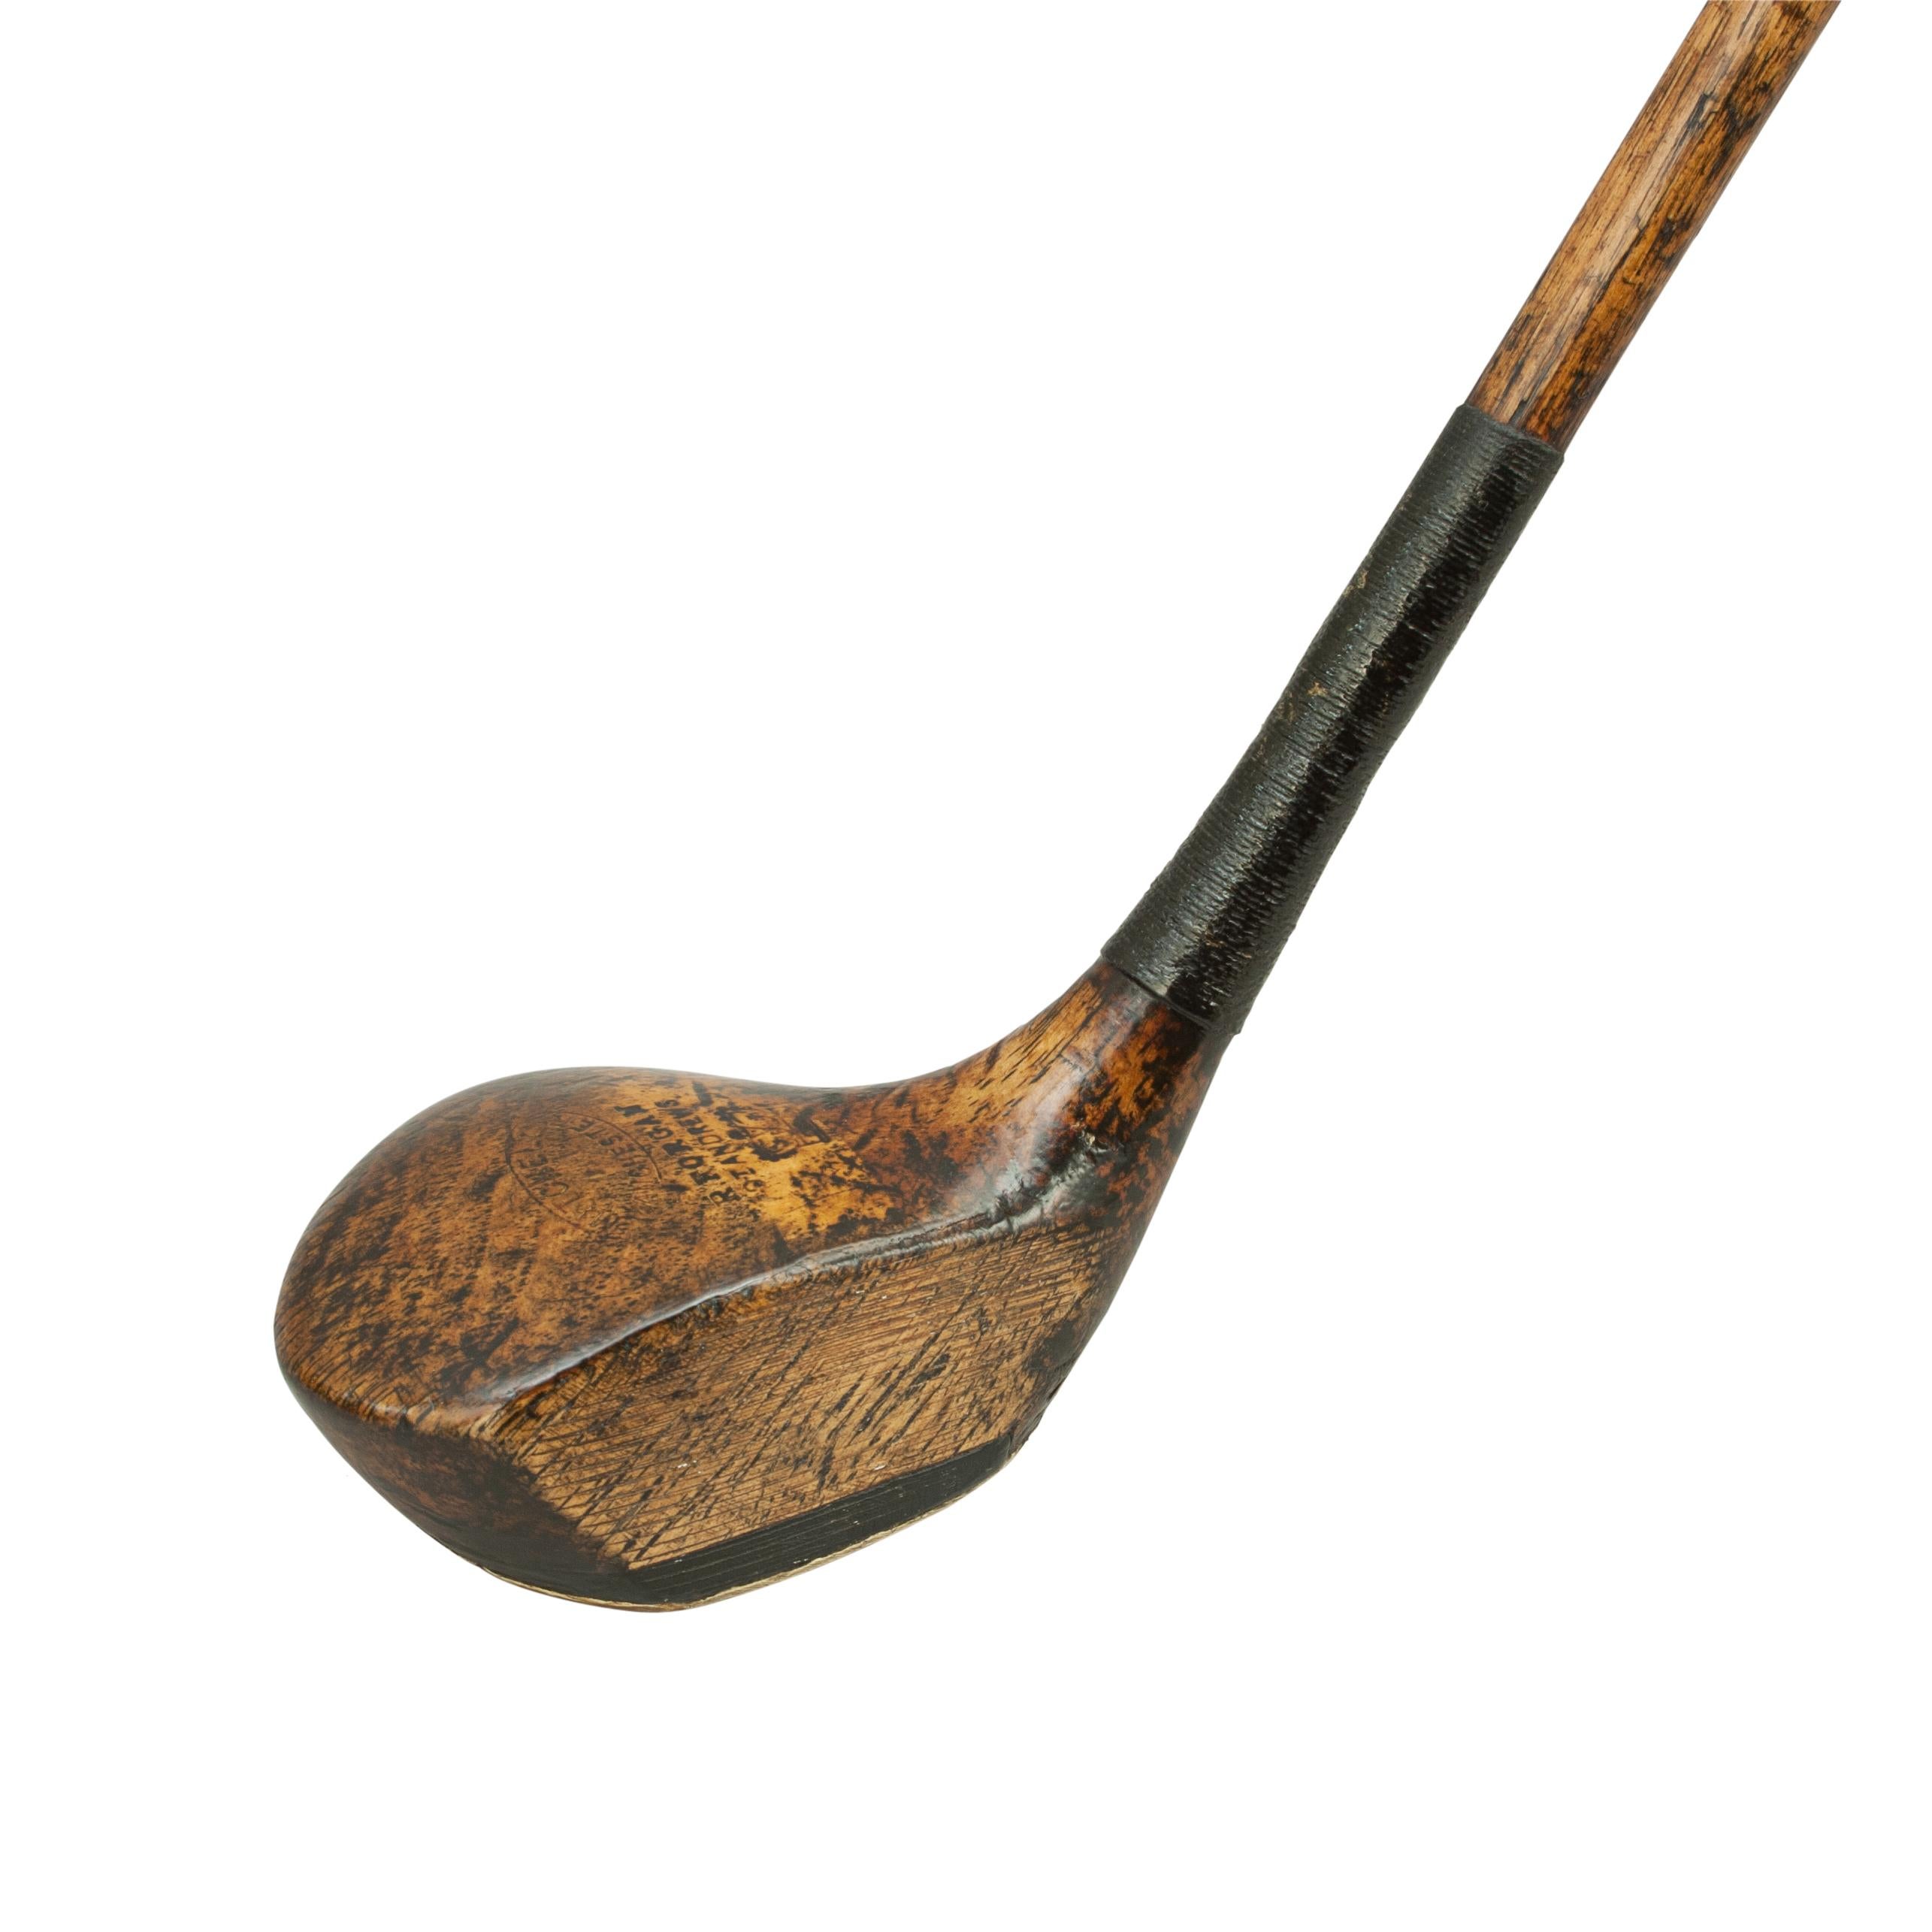 English Golf Club, Hickory Brassie by R. Forgan of St Andrews